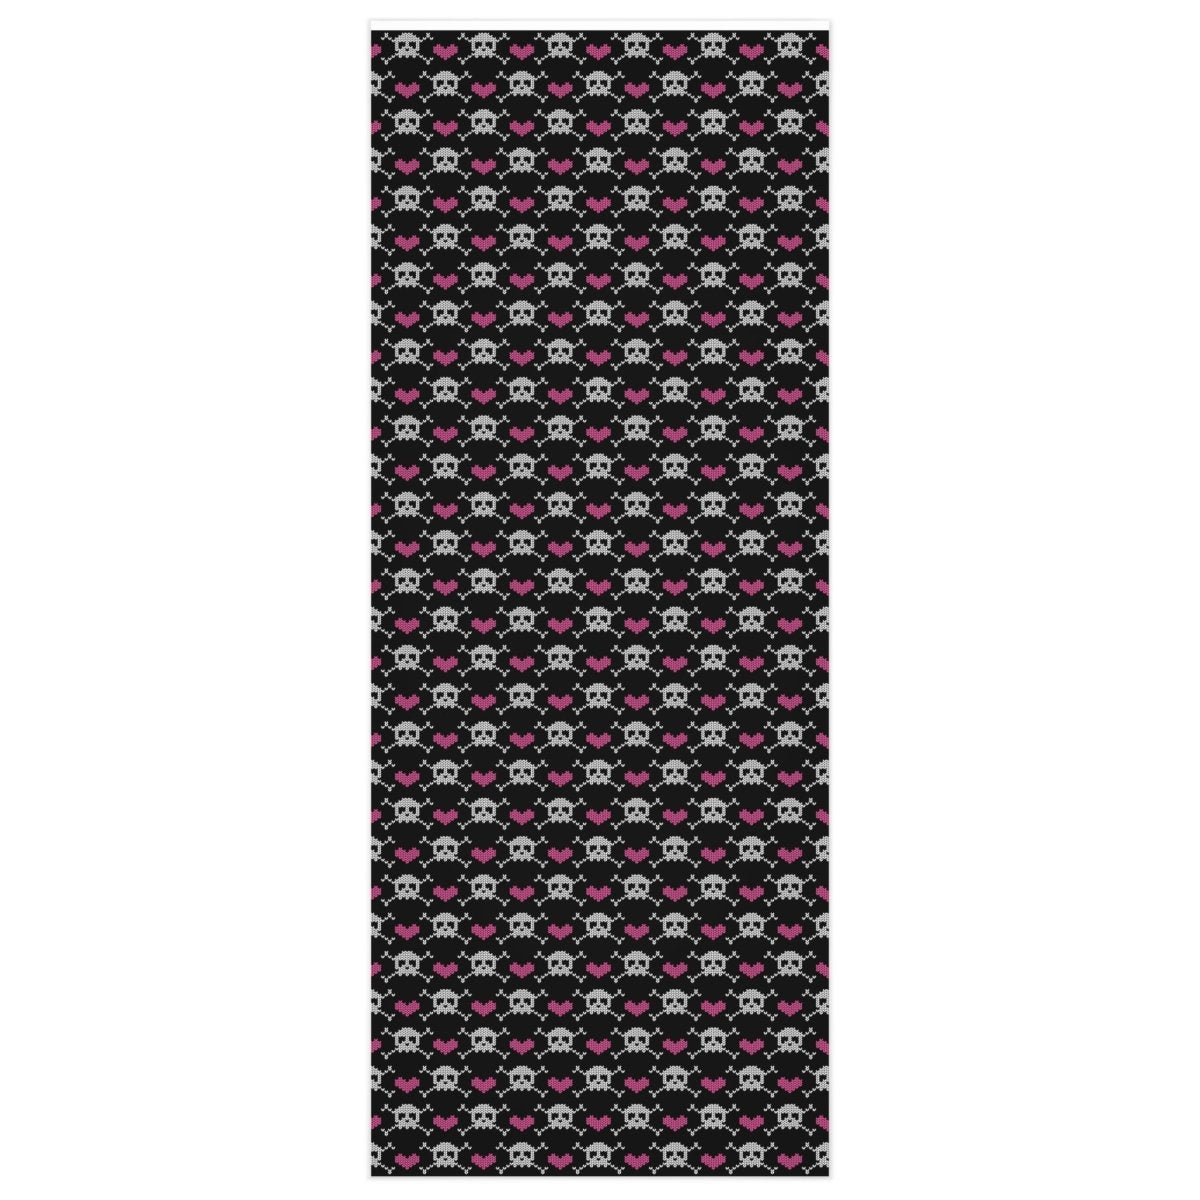 Too Fast | Skull Heart Patterned Gift Wrapping Paper